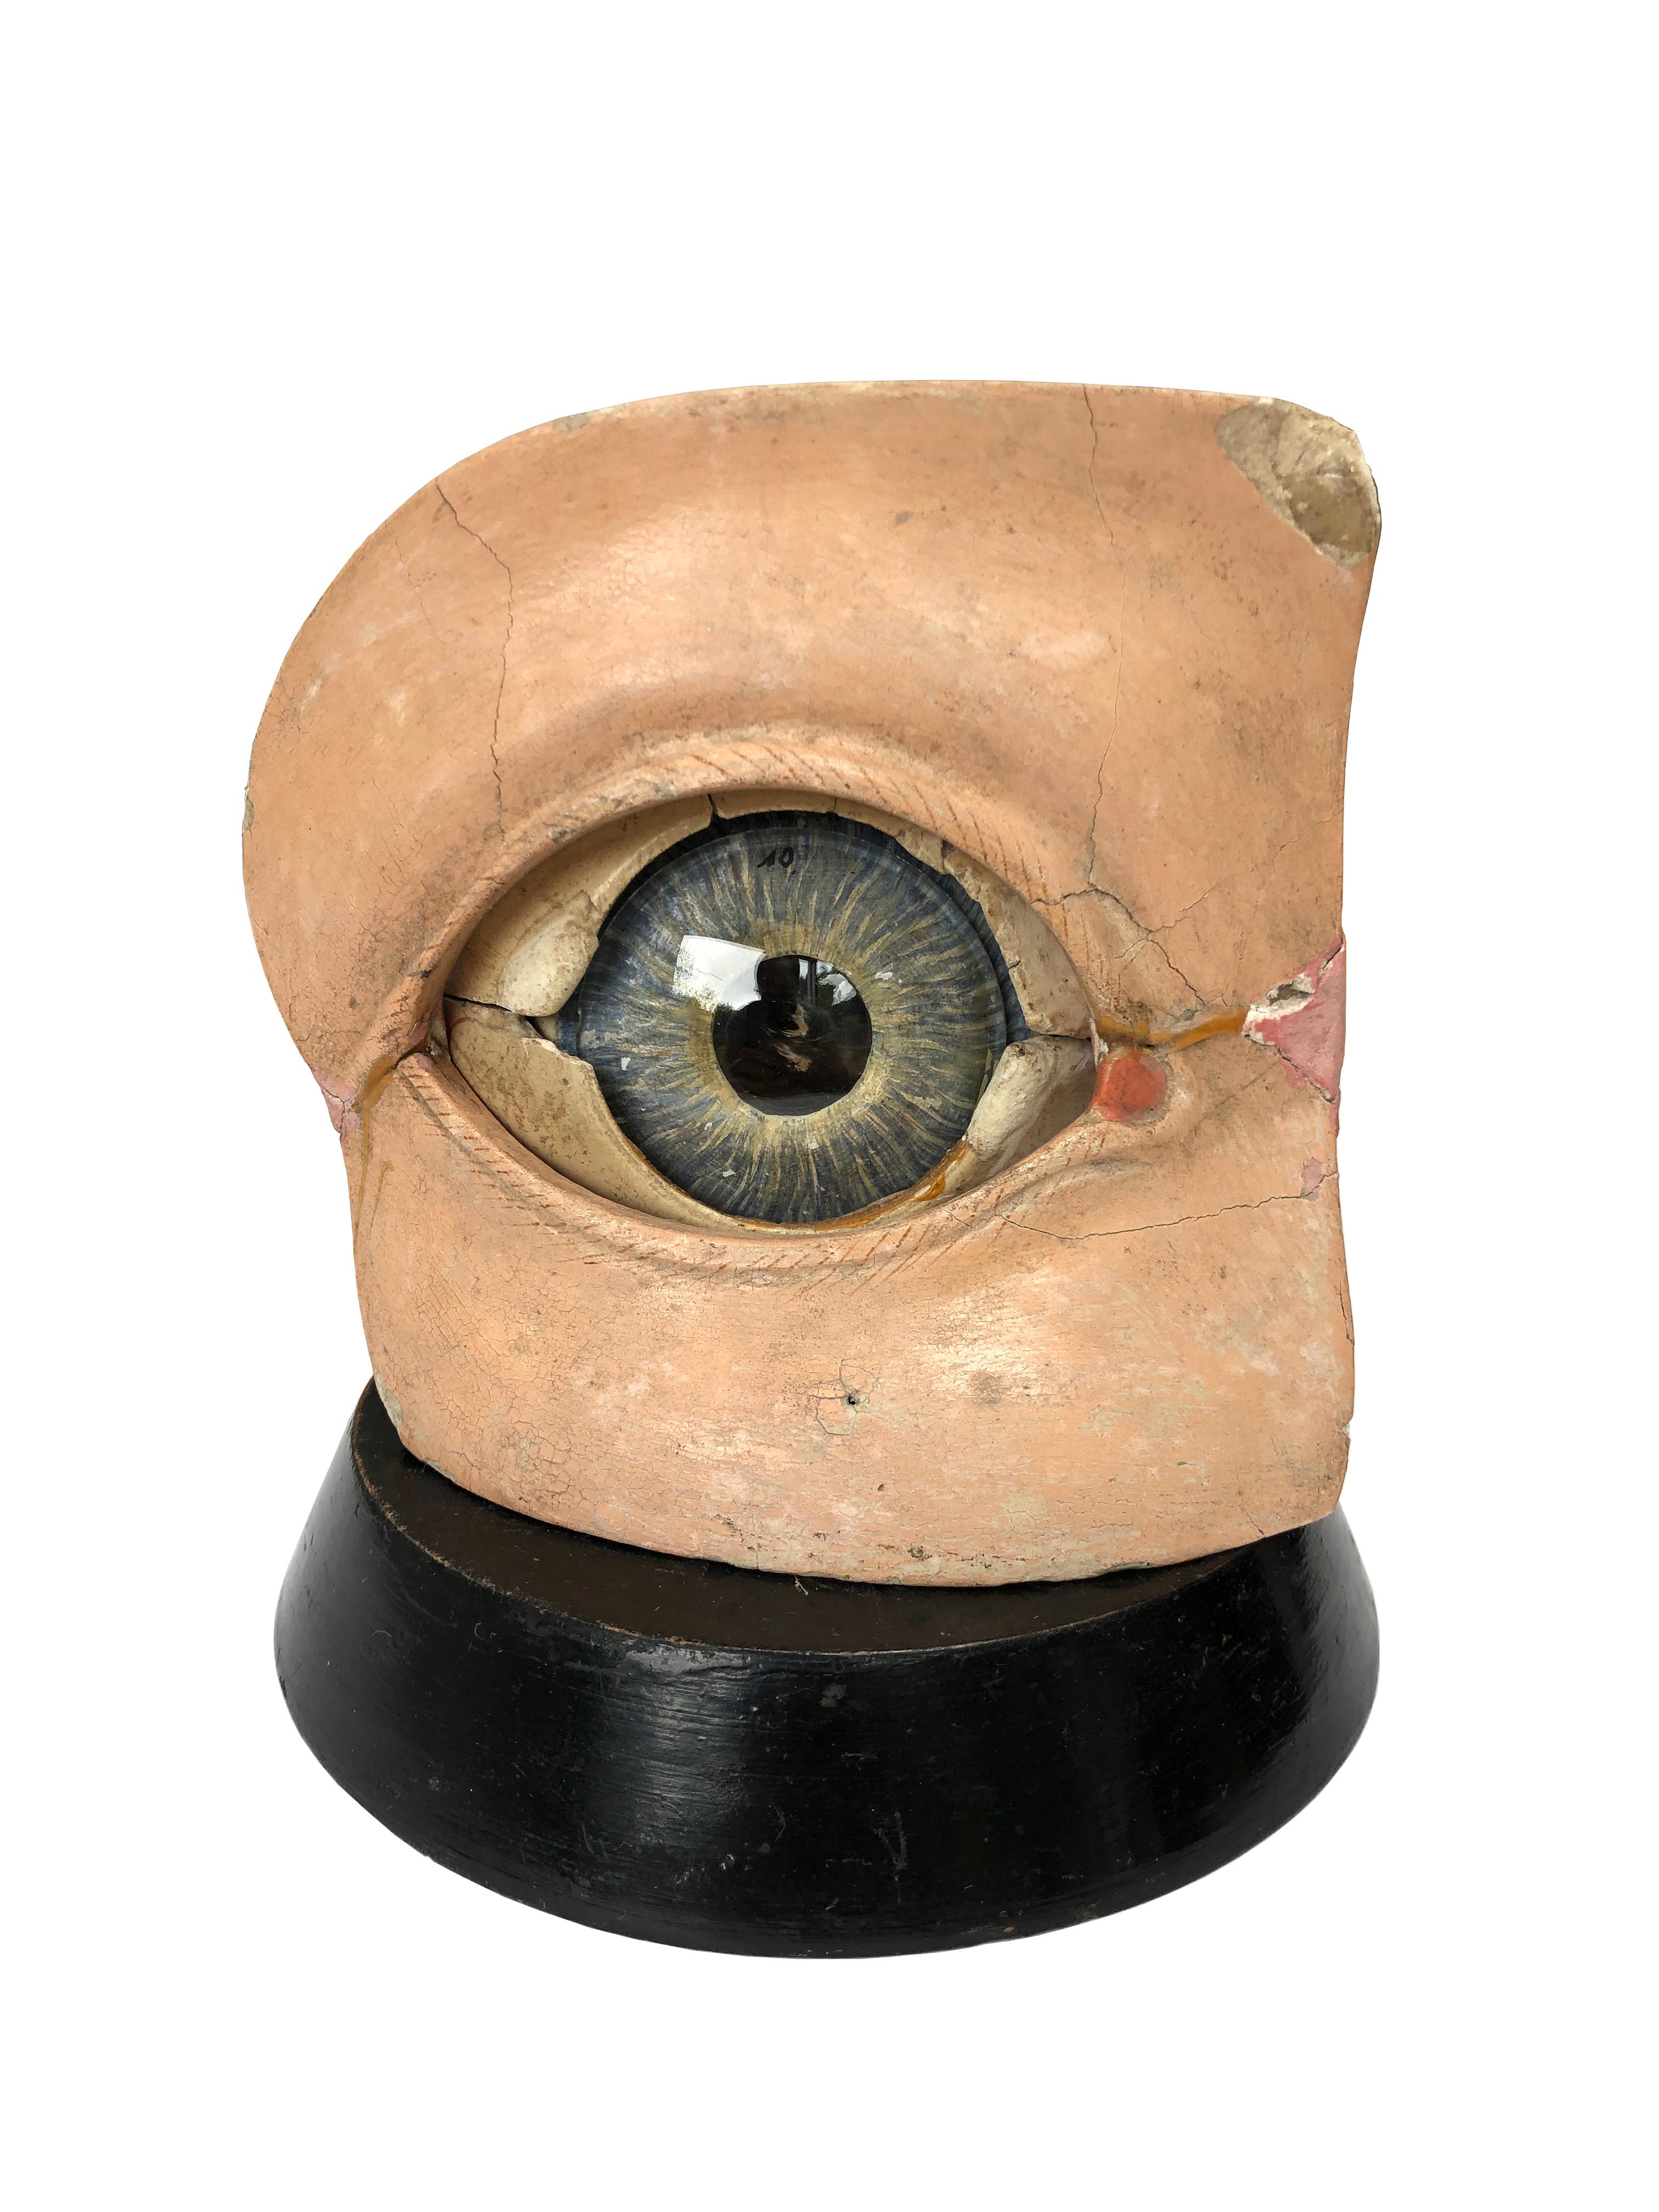 - An incredible hand painted plaster and papier-mâché model of the eye, early 20th century possibly of Dutch origin.
- Fully dissectible with hand painted numbers across its construction, the inner eye is of glass as is the optic nerve. The top